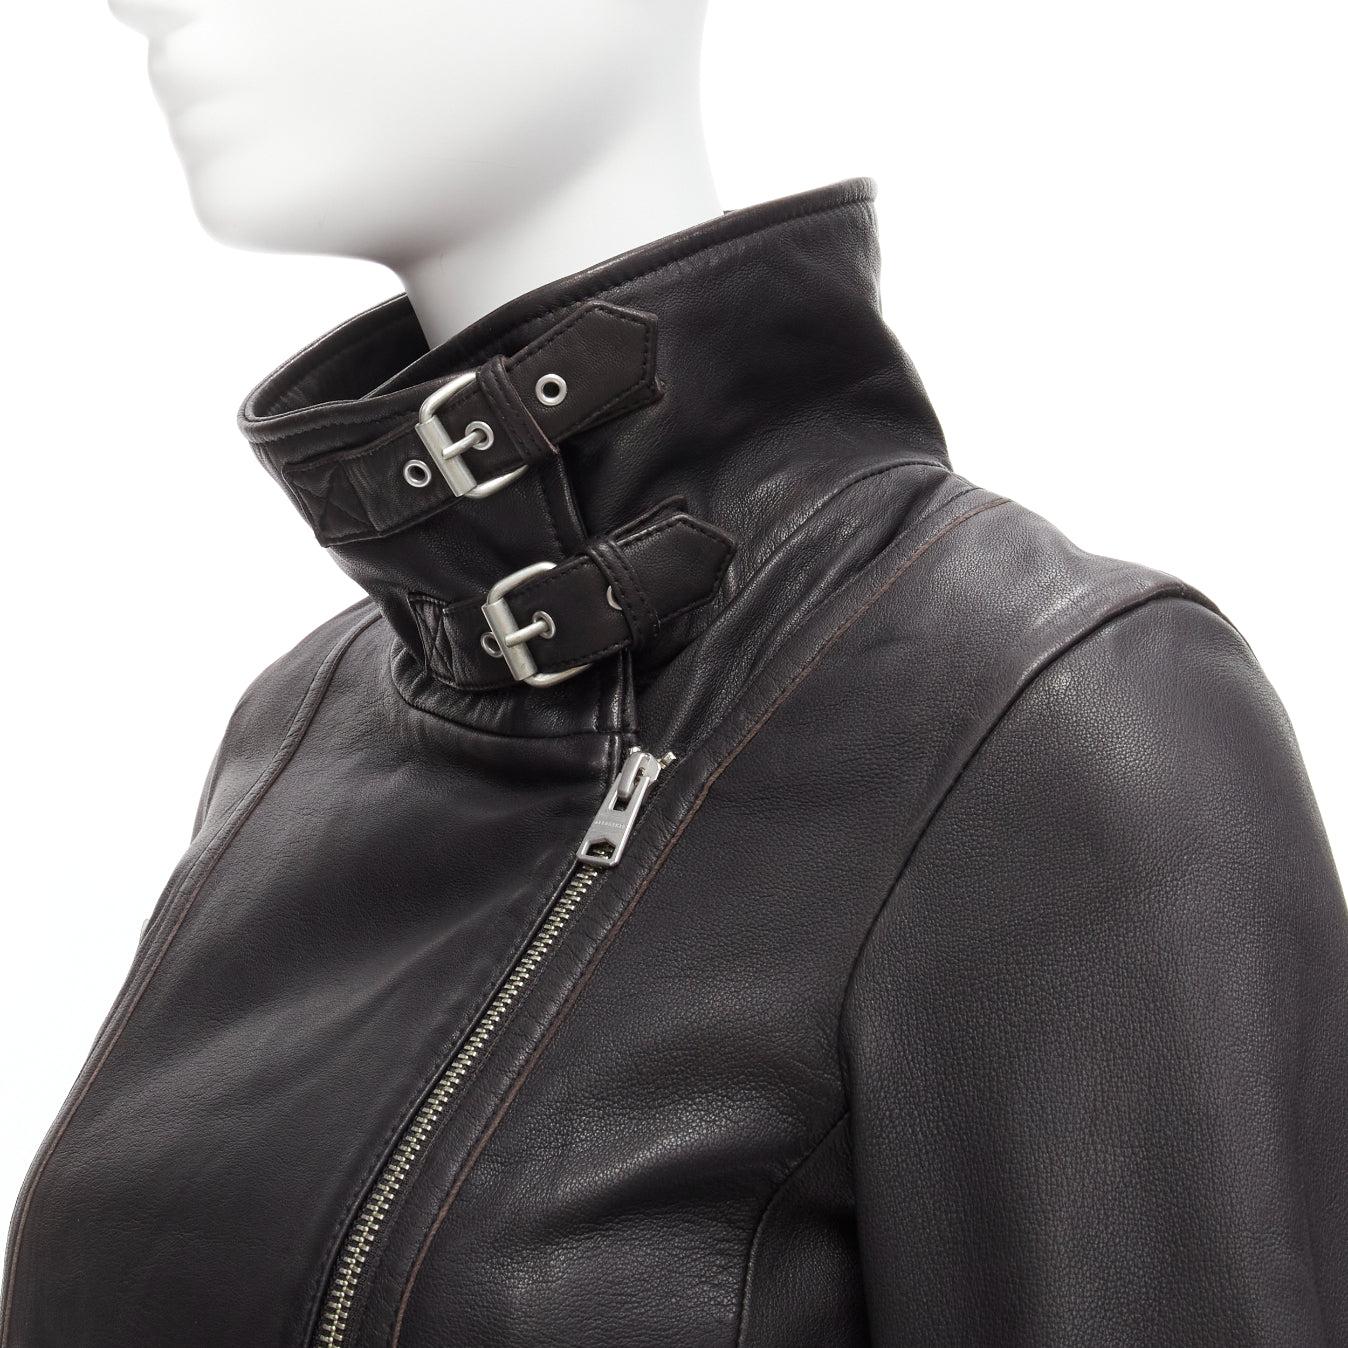 ALL SAINTS Bales black lamb leather buckles funnel collar biker jacket UK6 XS
Reference: SNKO/A00257
Brand: All Saints
Model: Bales
Material: Lambskin Leather
Color: Black, Silver
Pattern: Solid
Closure: Zip
Lining: Black Fabric
Extra Details: Back